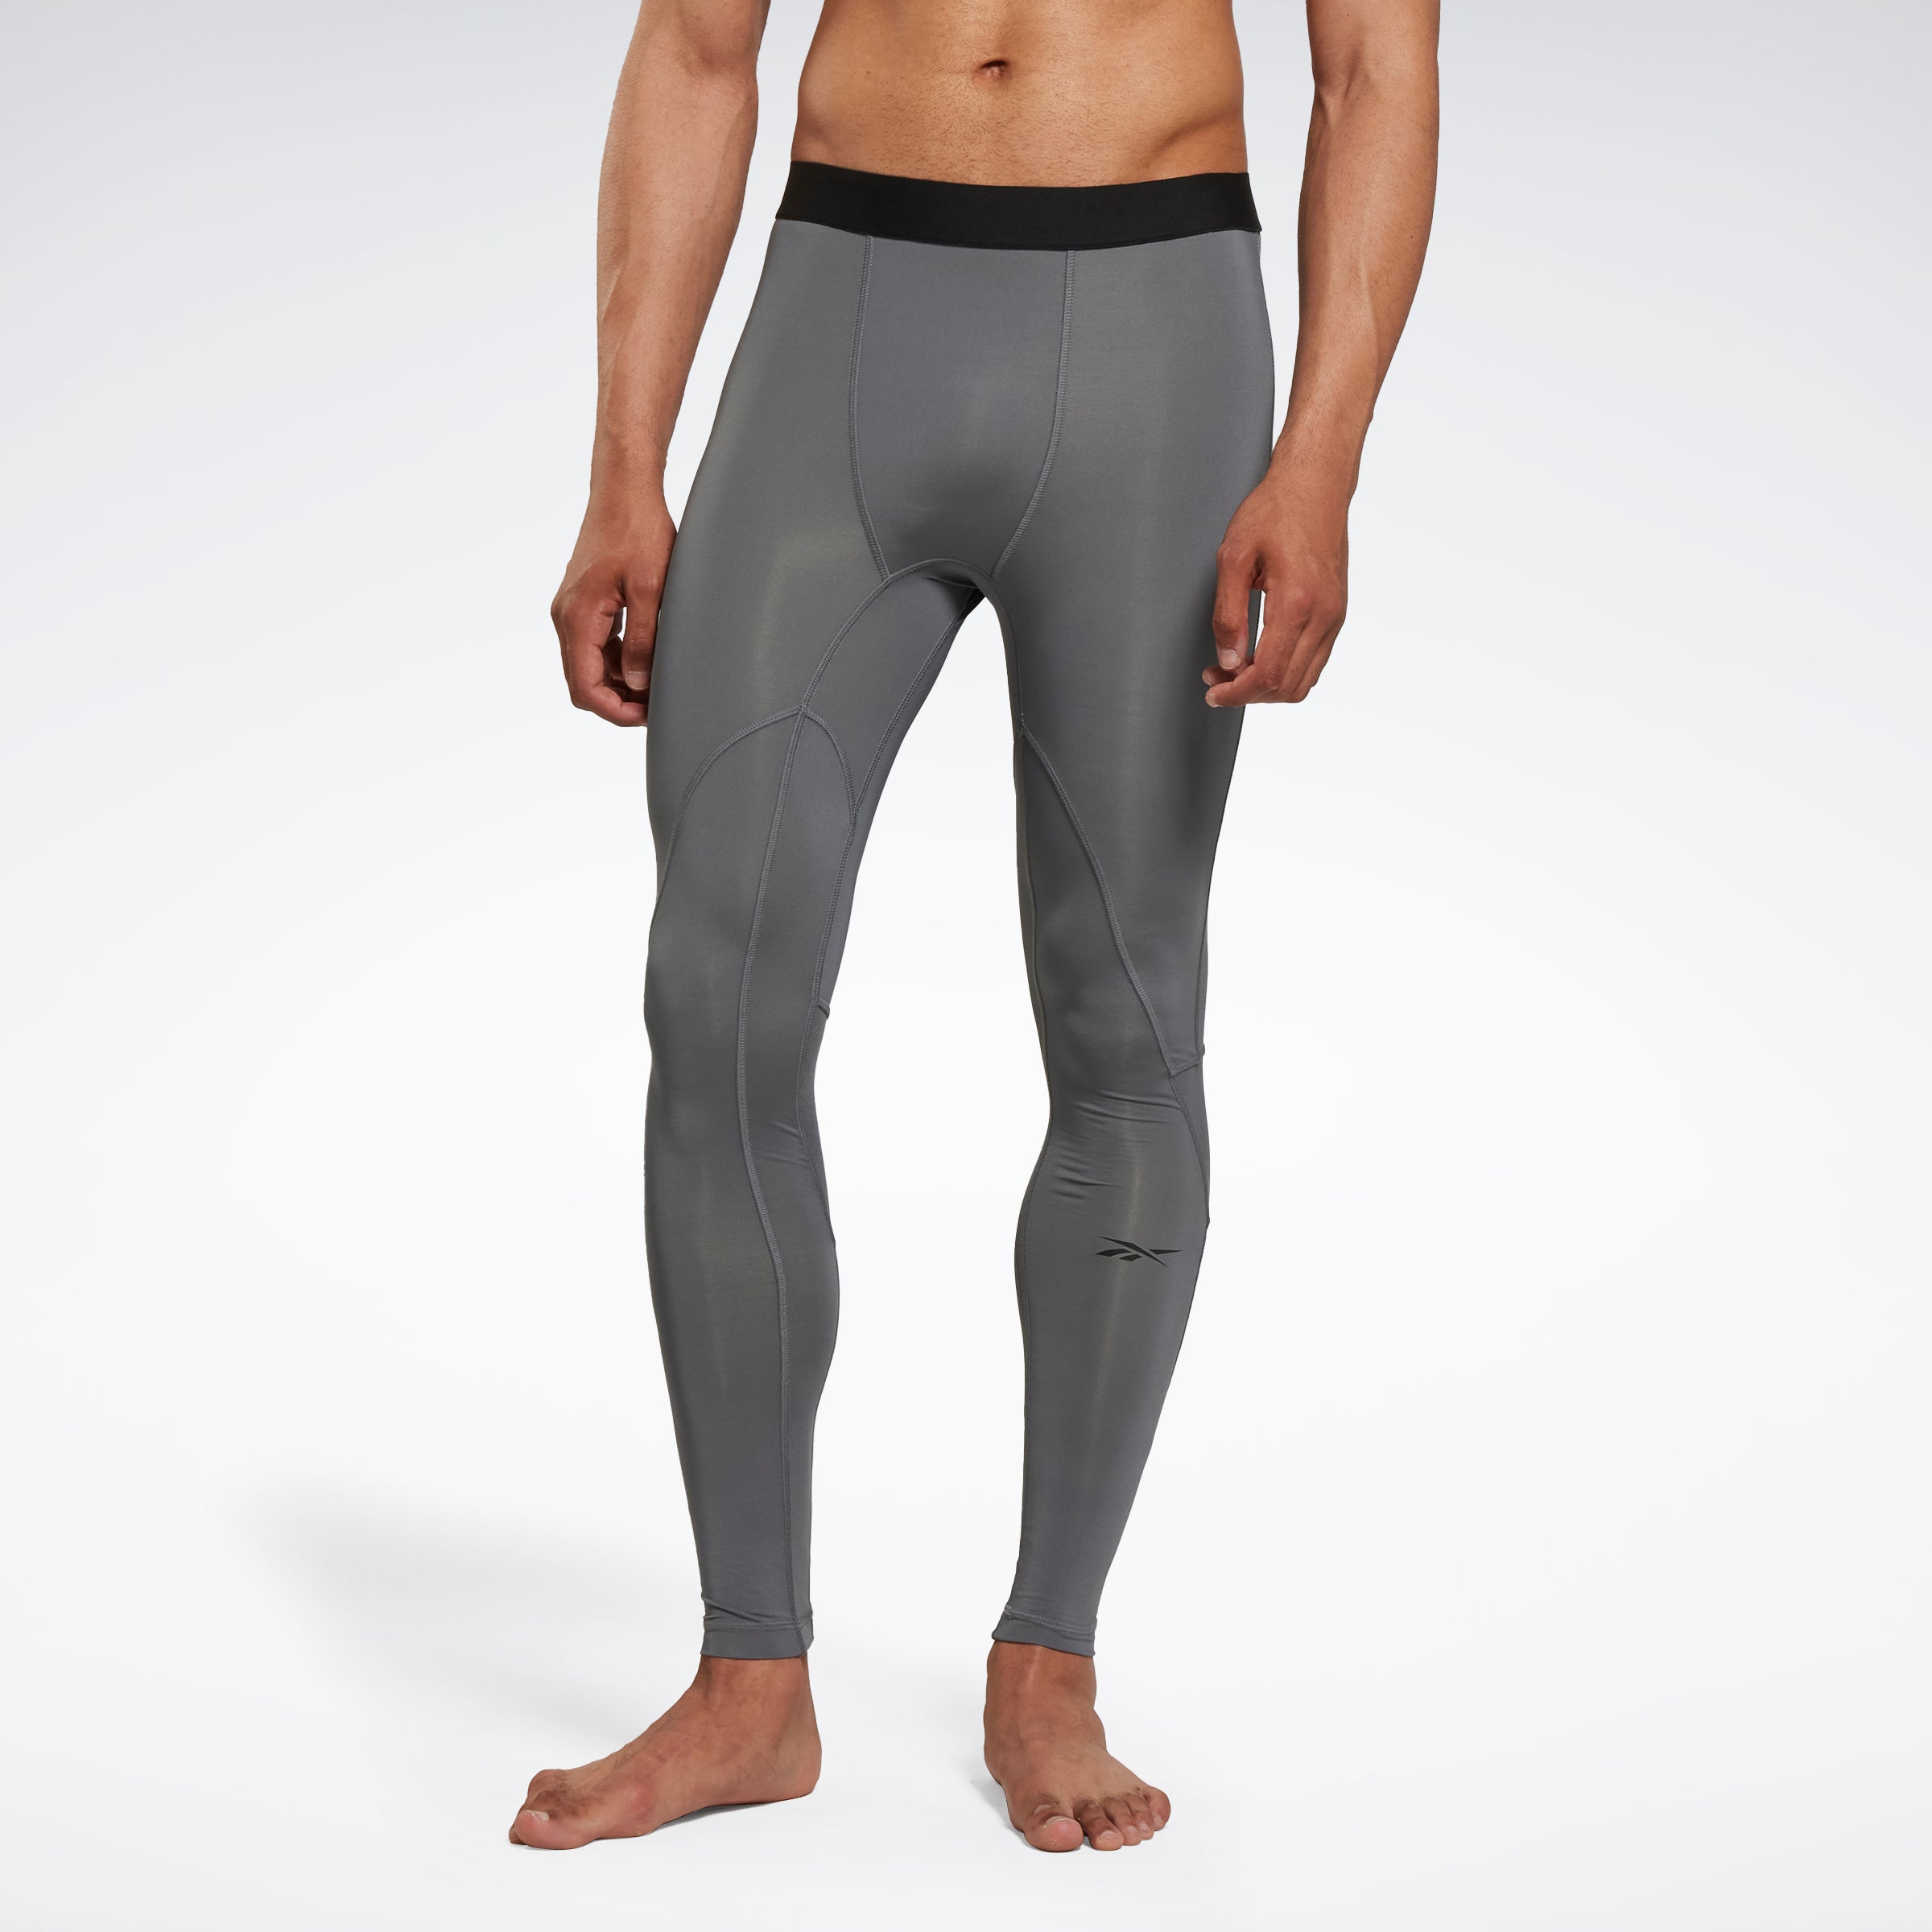 SKINS Men's RY400 Compression Recovery Tights, Graphite/Blue